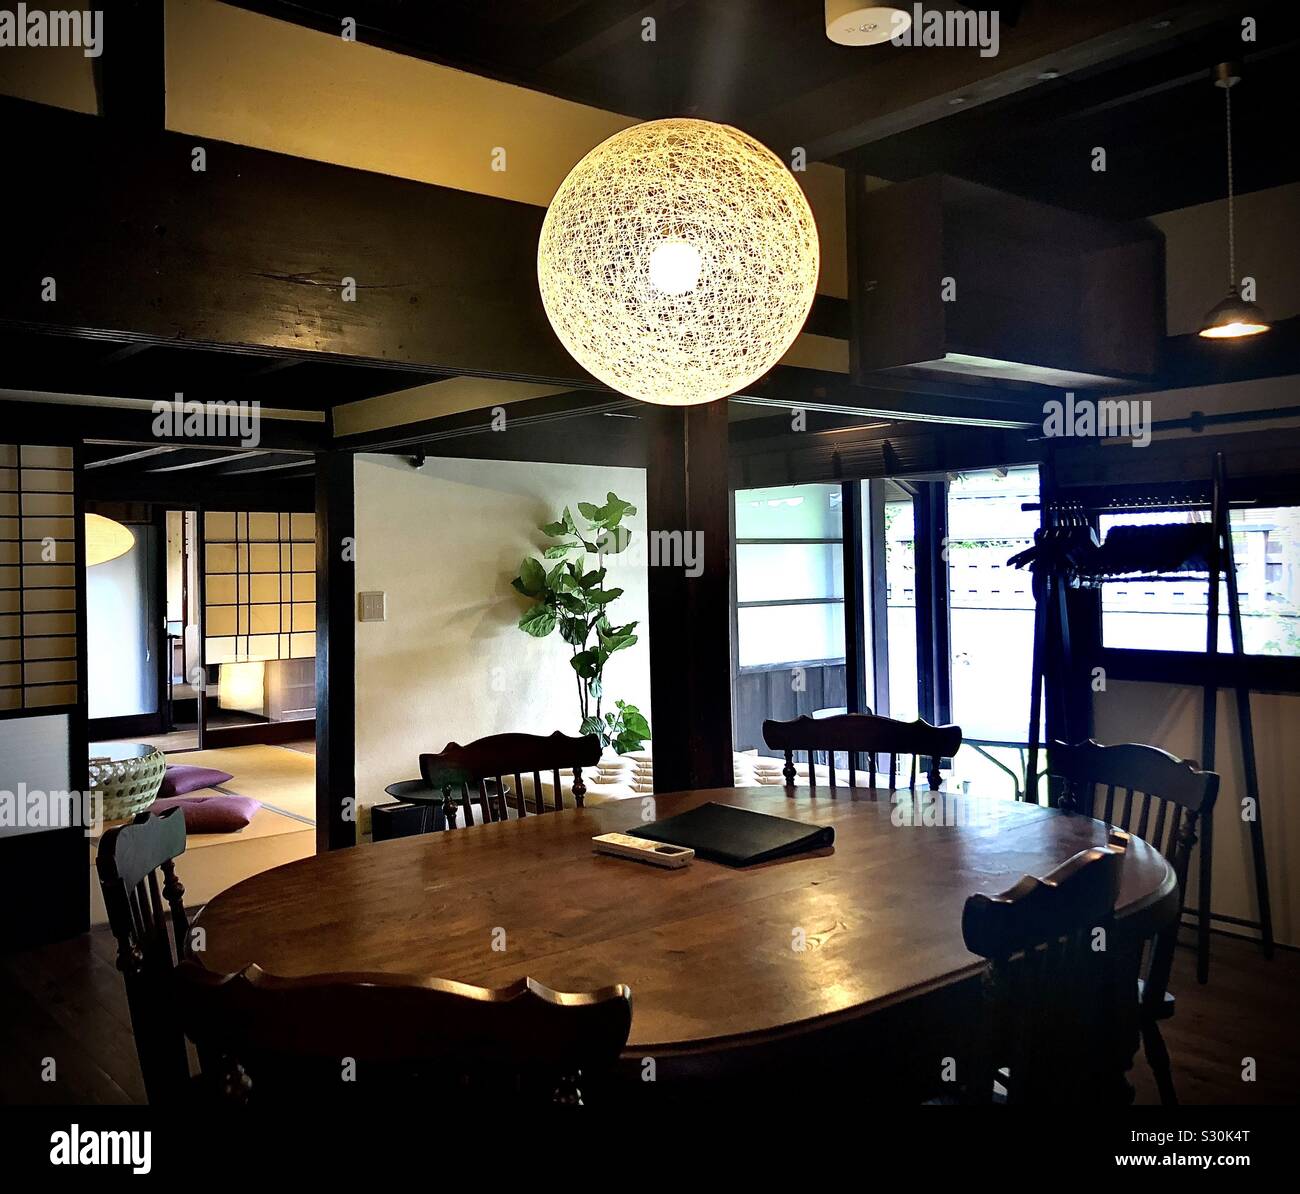 Japanese style dining room Stock Photo